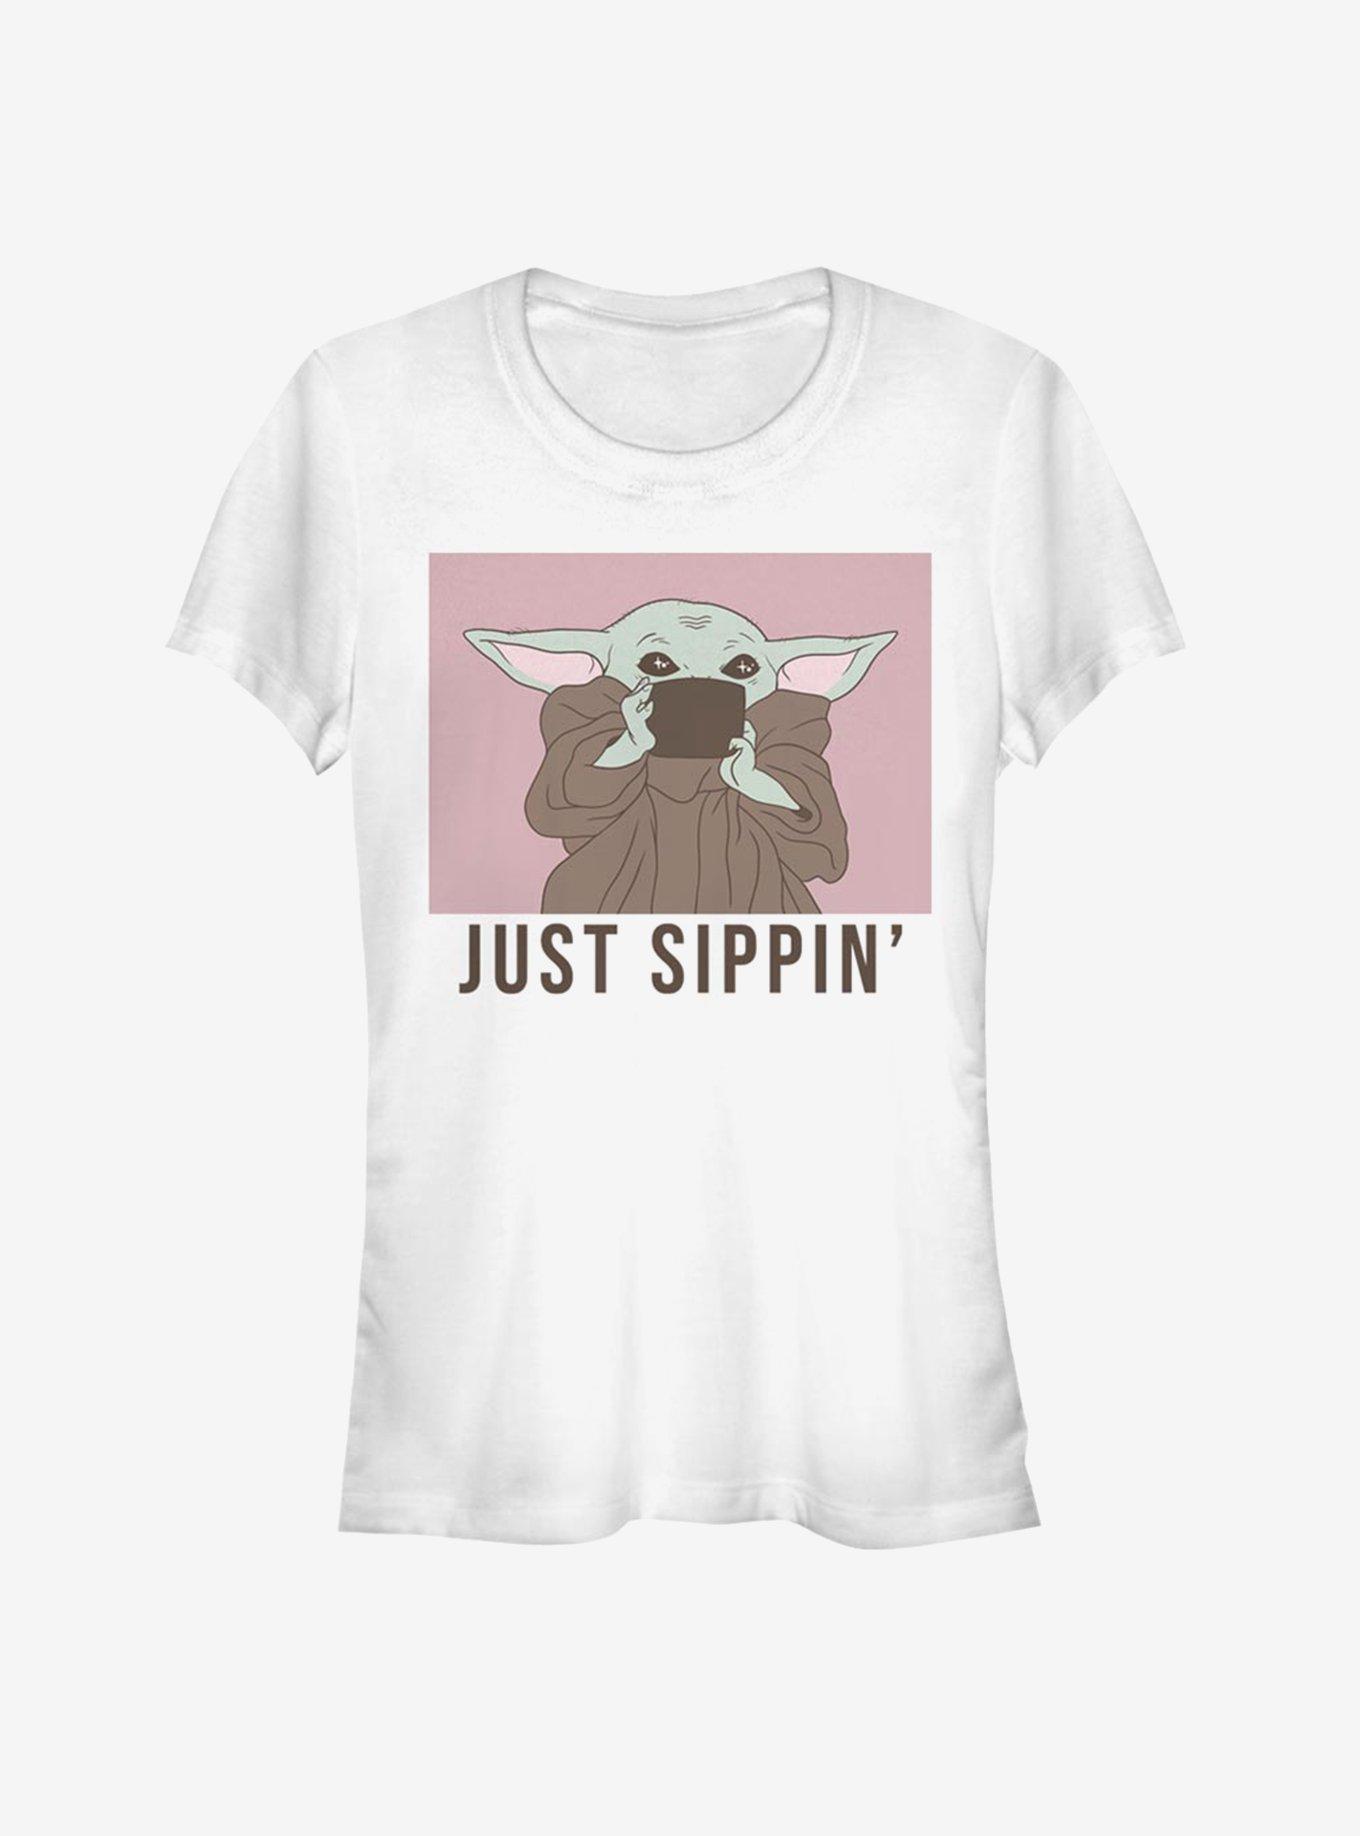 Star Wars The Mandalorian The Child Just Sippin Girls T-Shirt, WHITE, hi-res